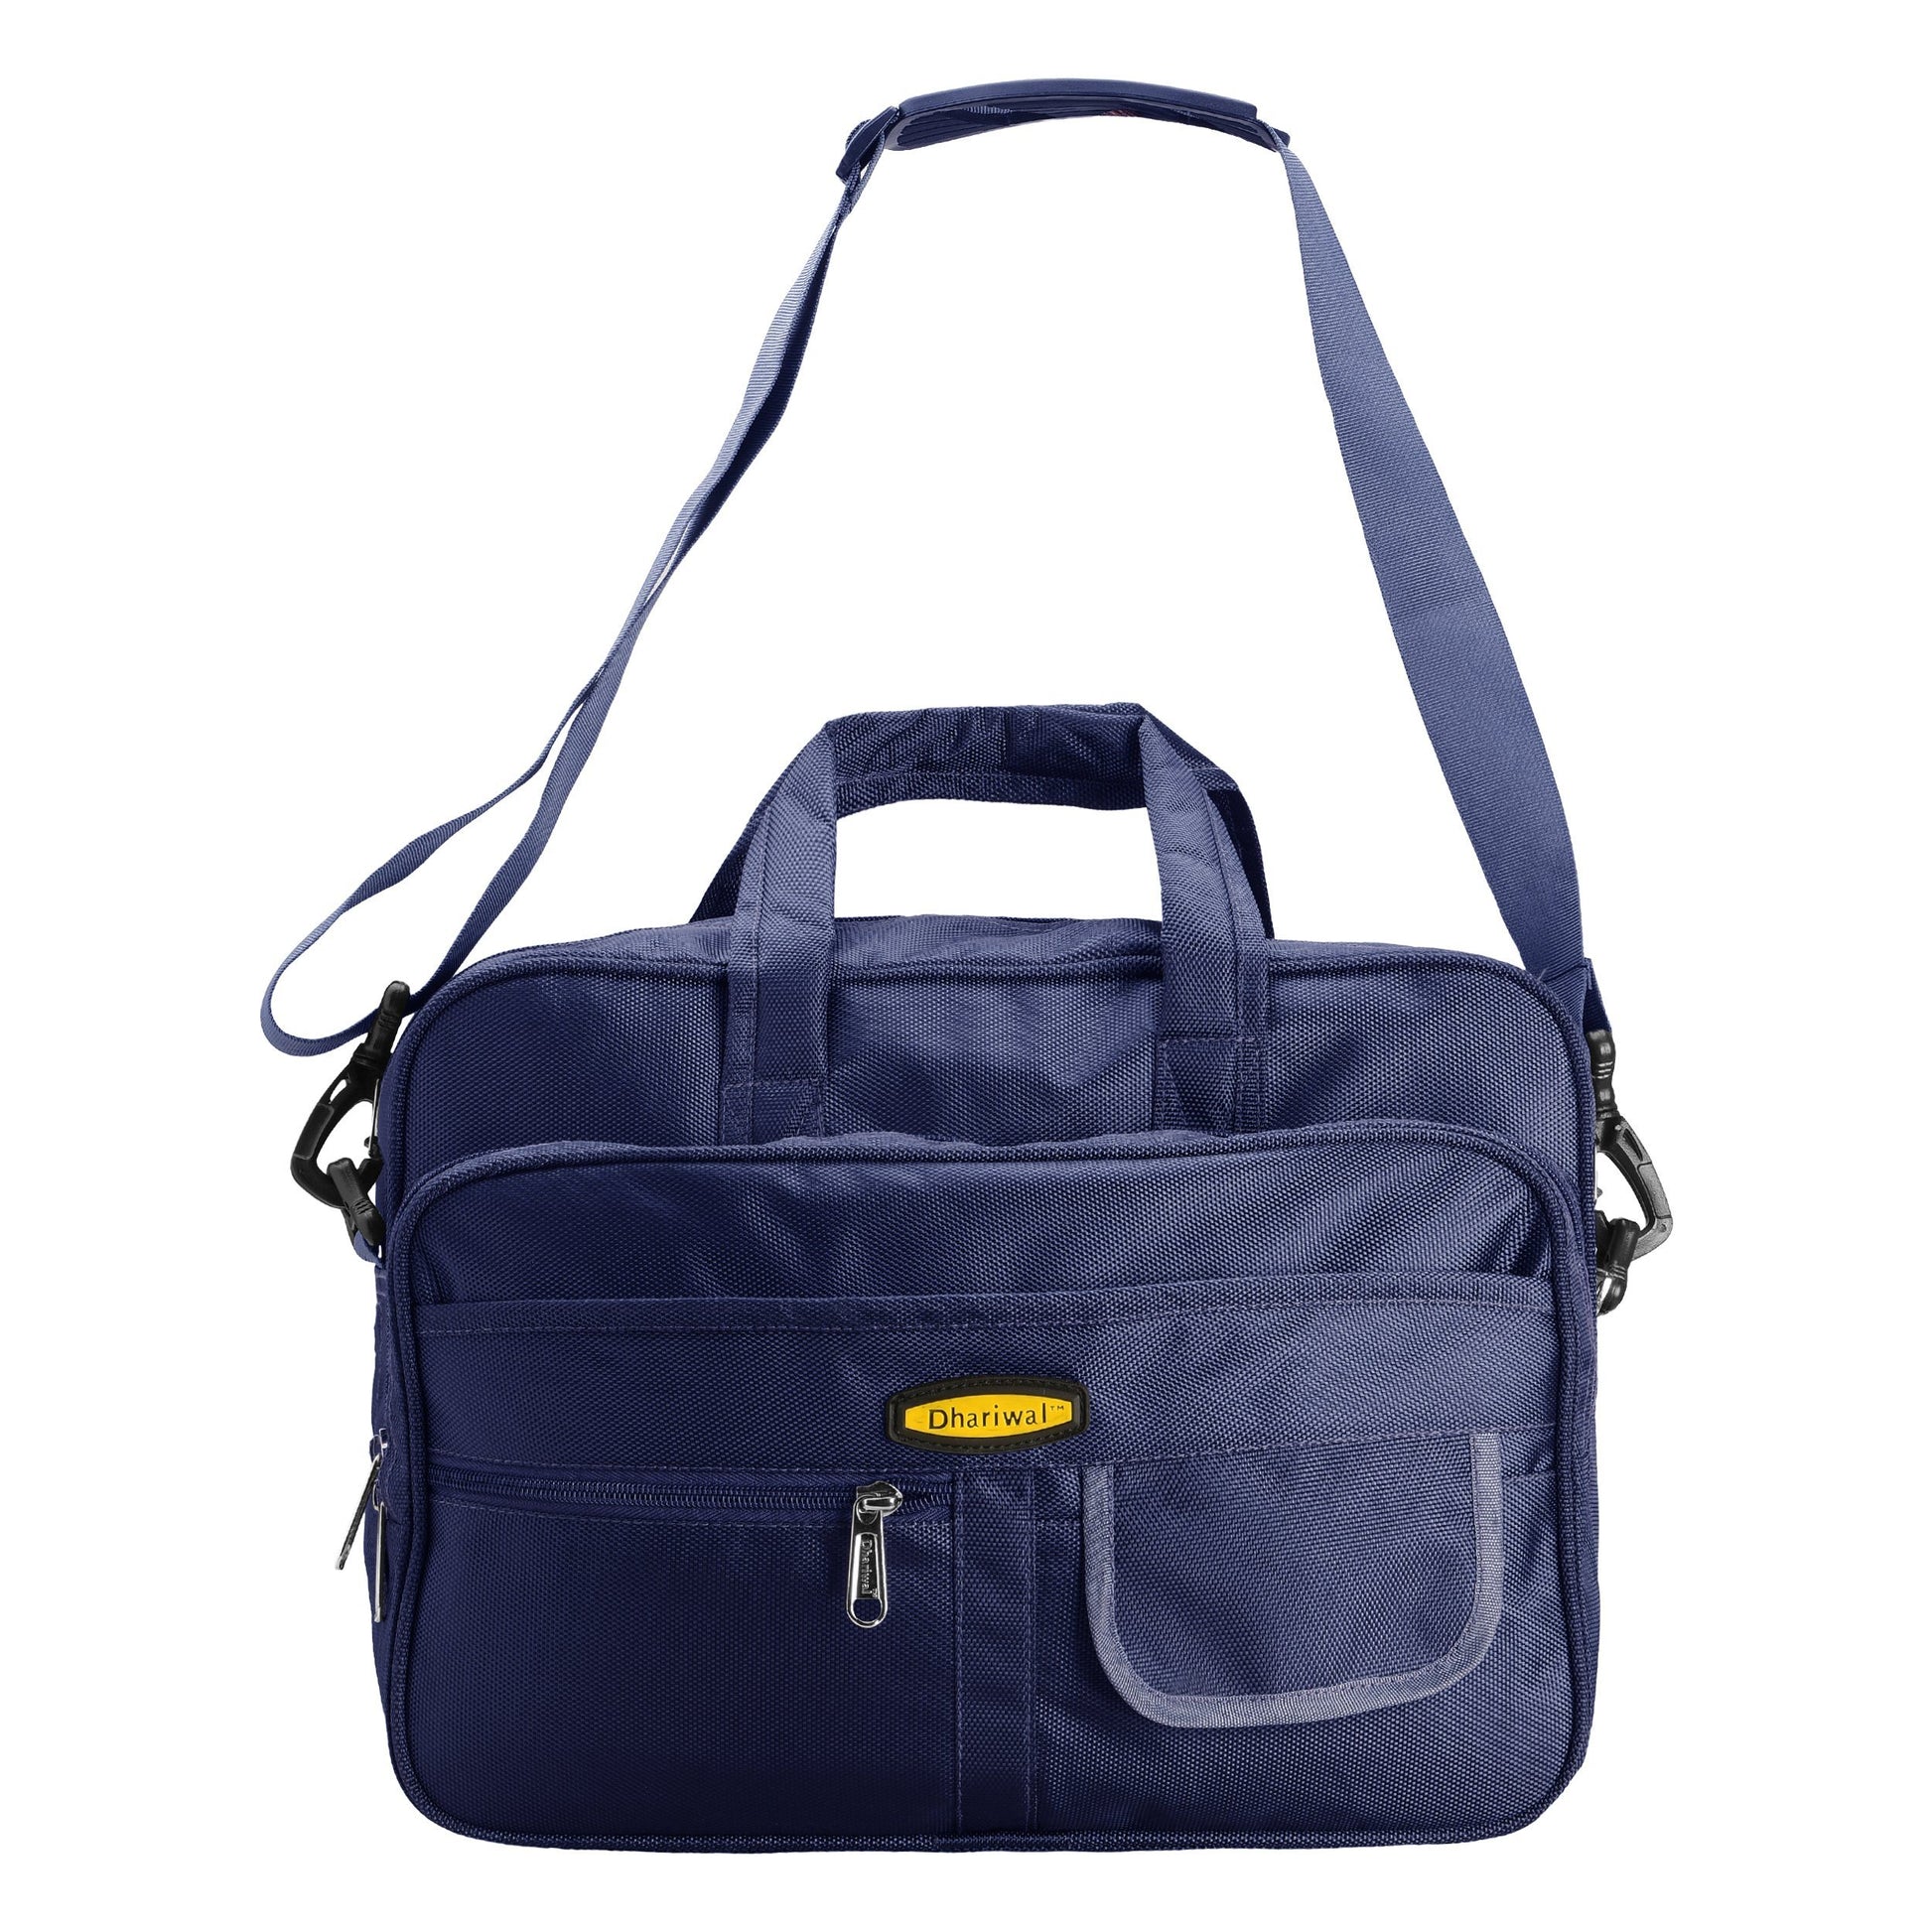 Office Executive File Bag 1680 Matty with Laptop Cushion 16" EB-607 Executive Bags Dhariwal Blue 